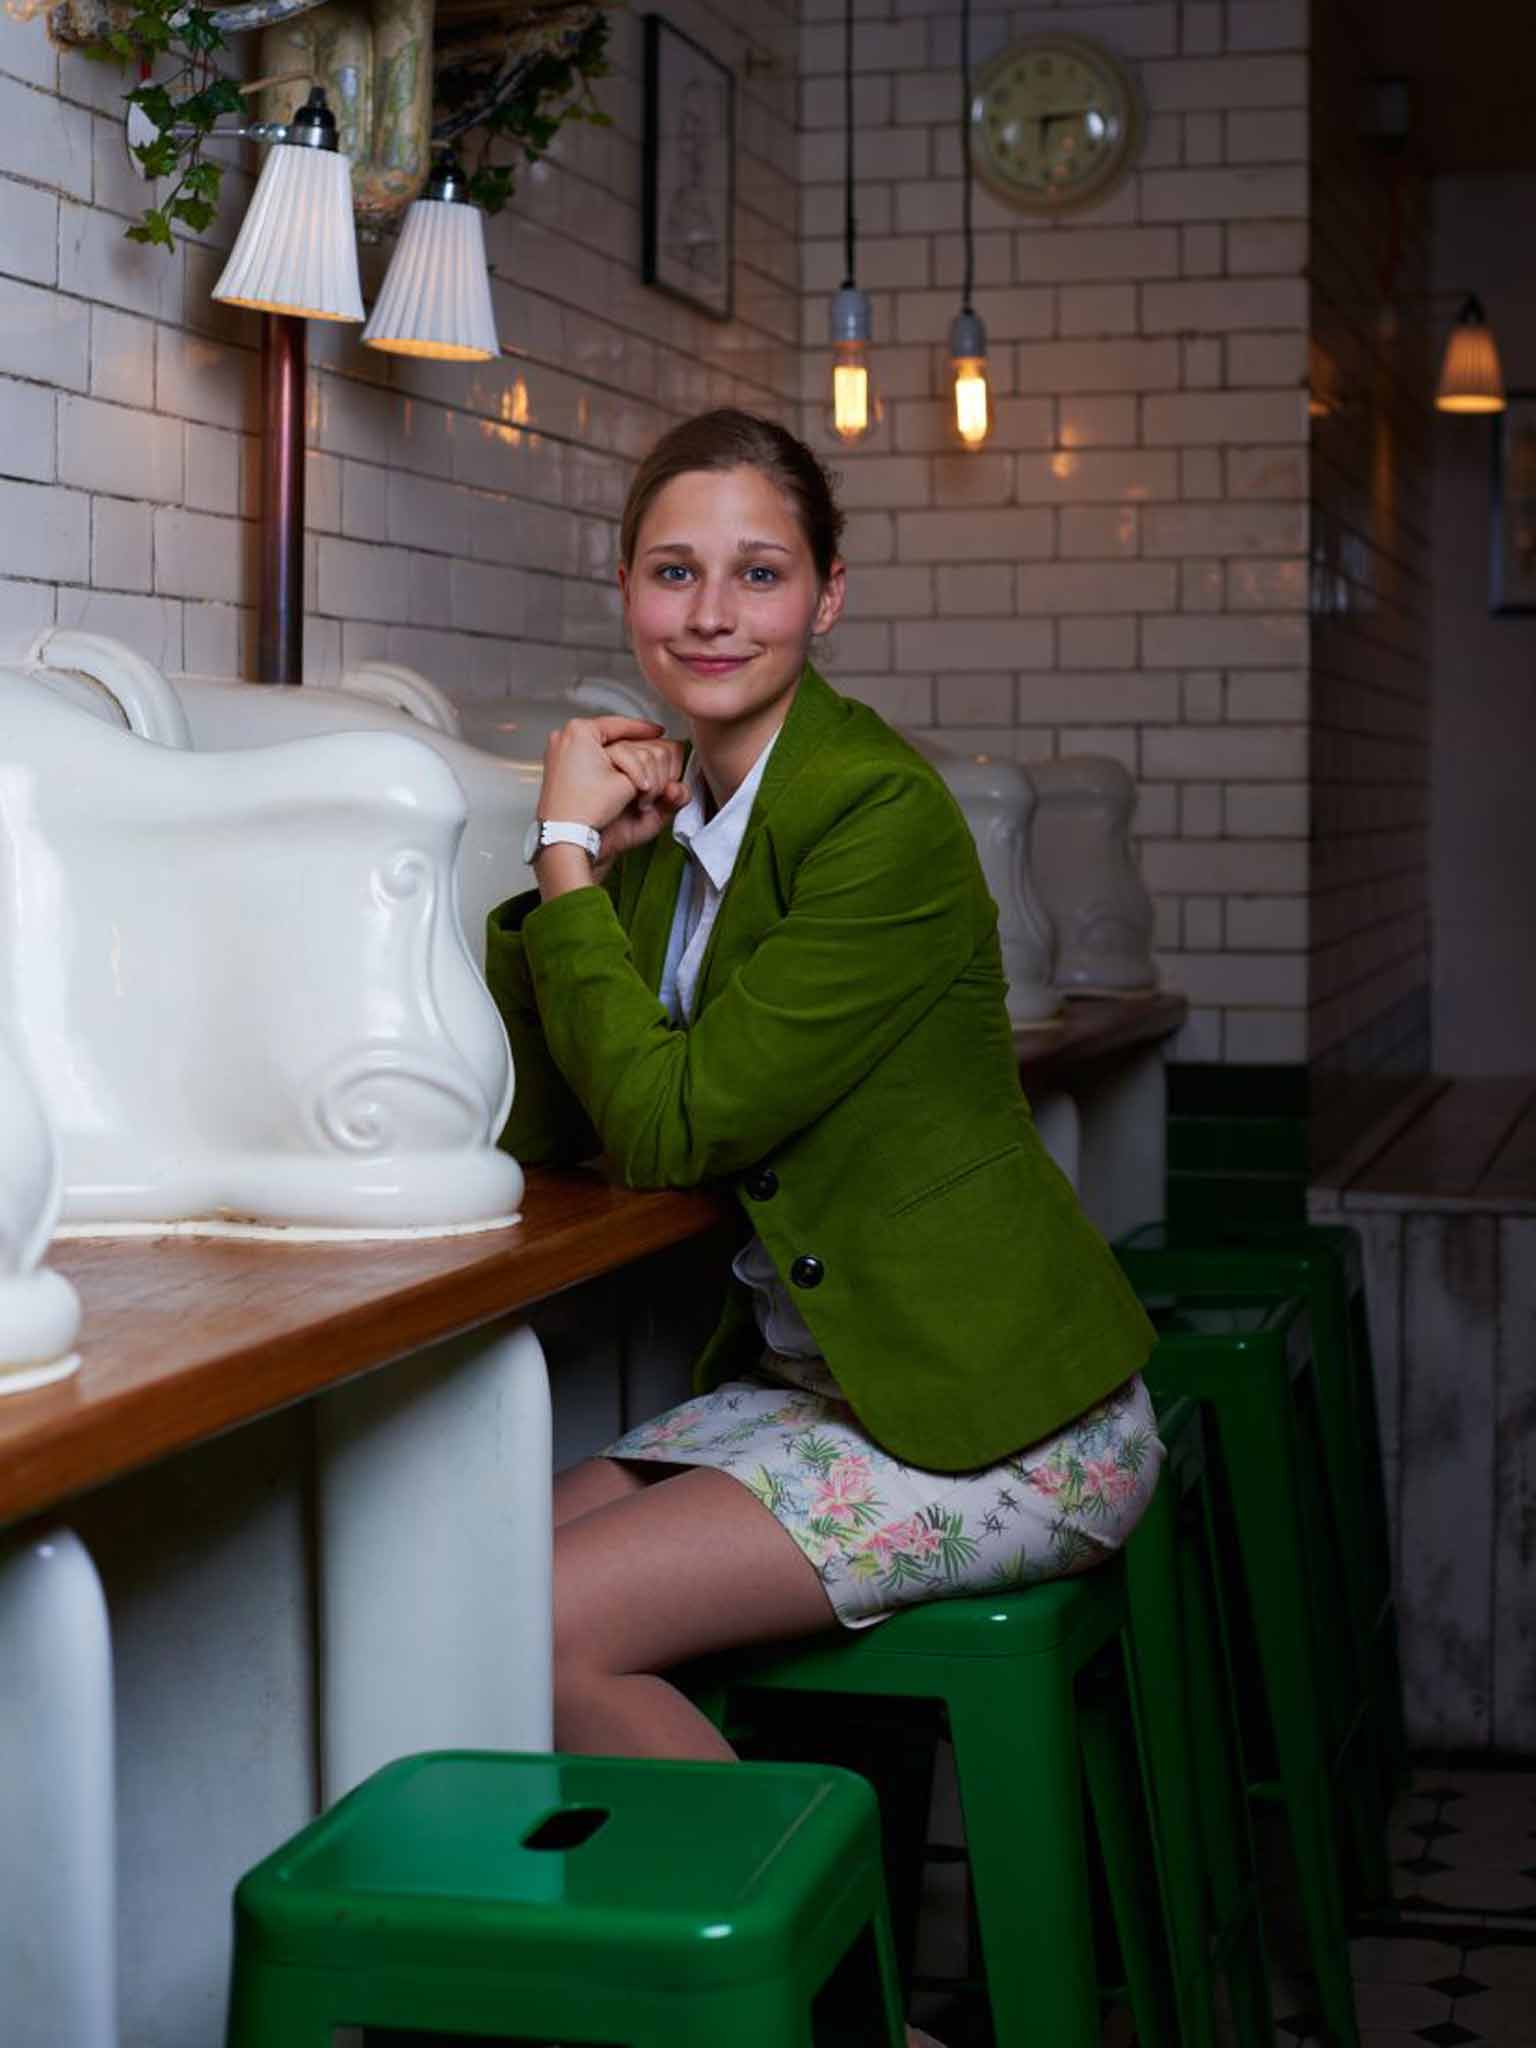 Author and scientist Giulia Enders at The Attendant, a cafe
converted from a public loo